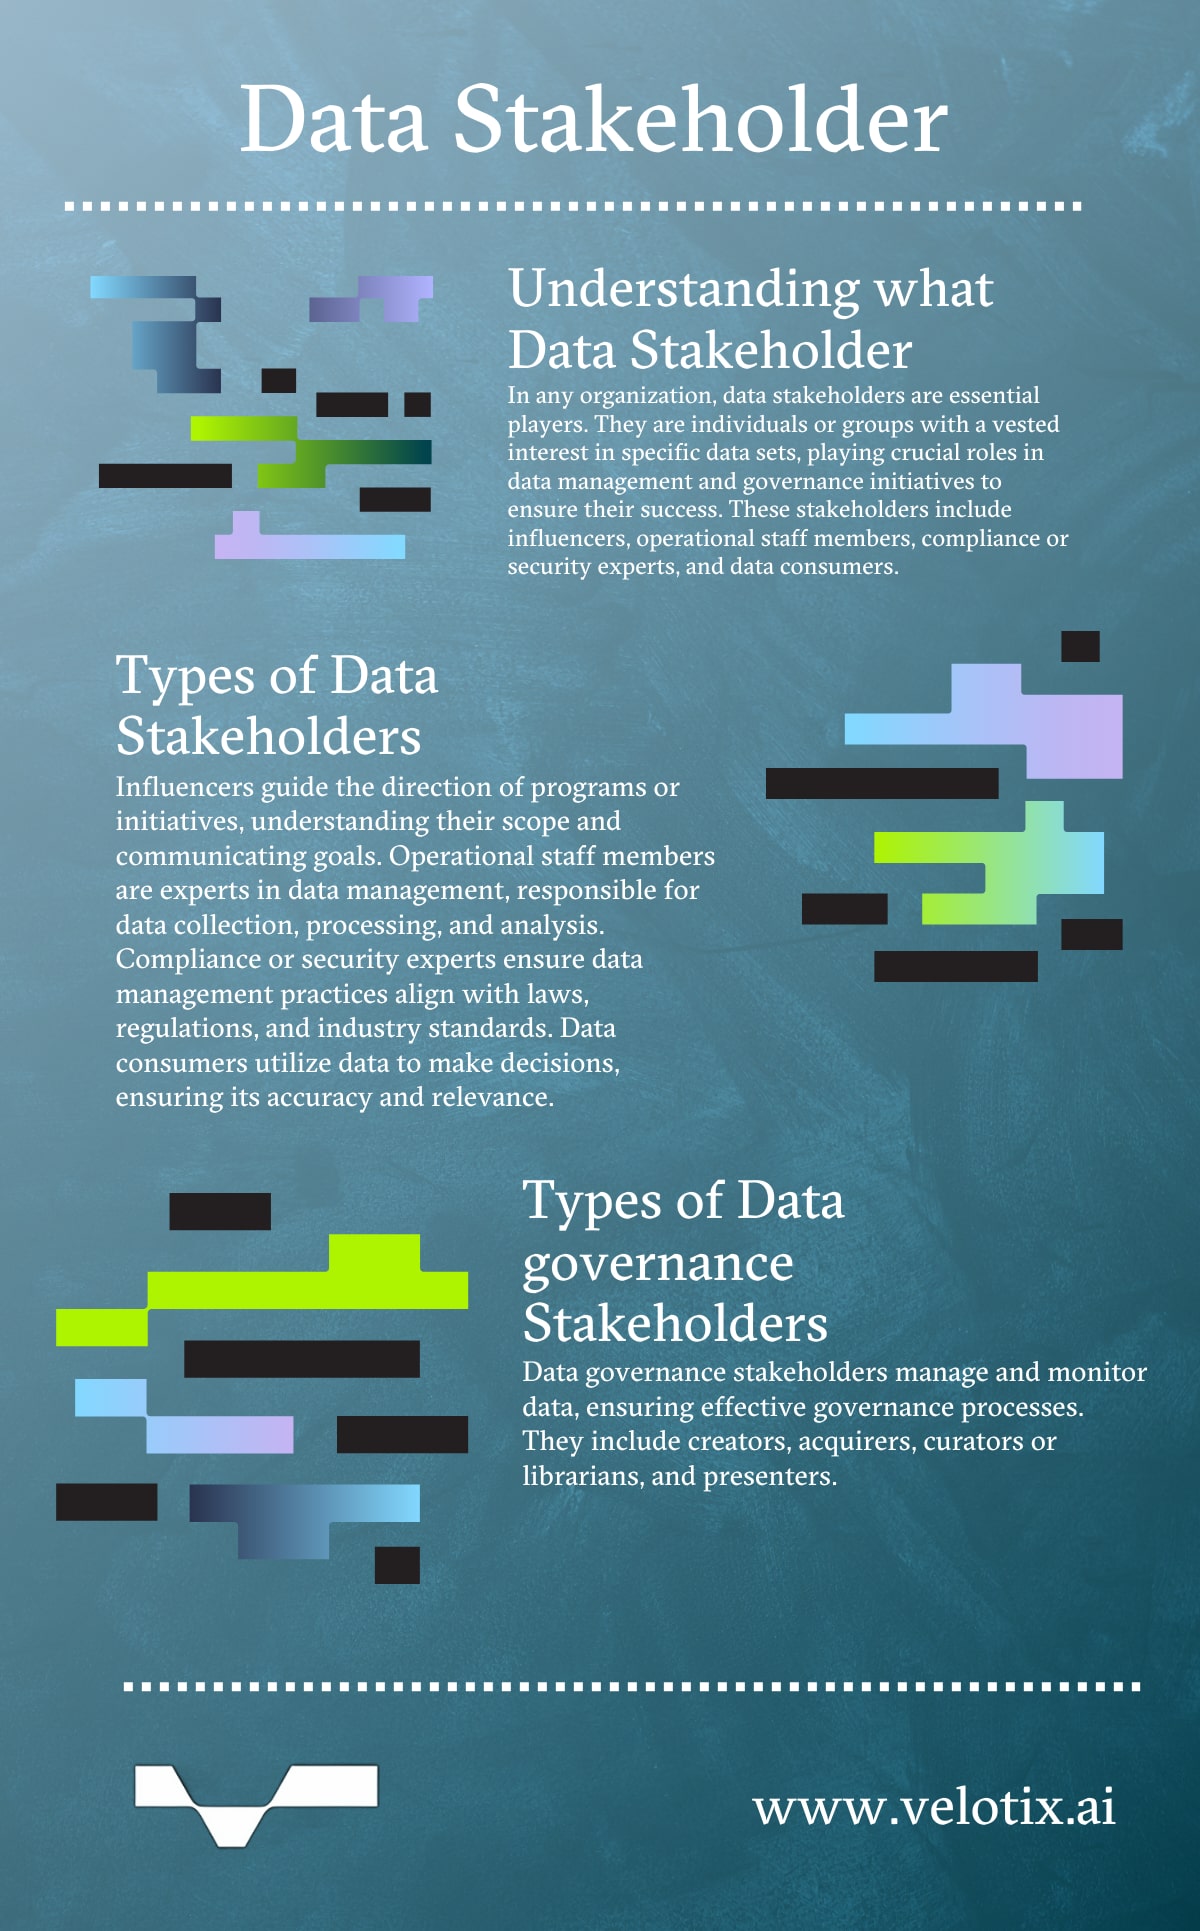 What is a Data Stakeholder?